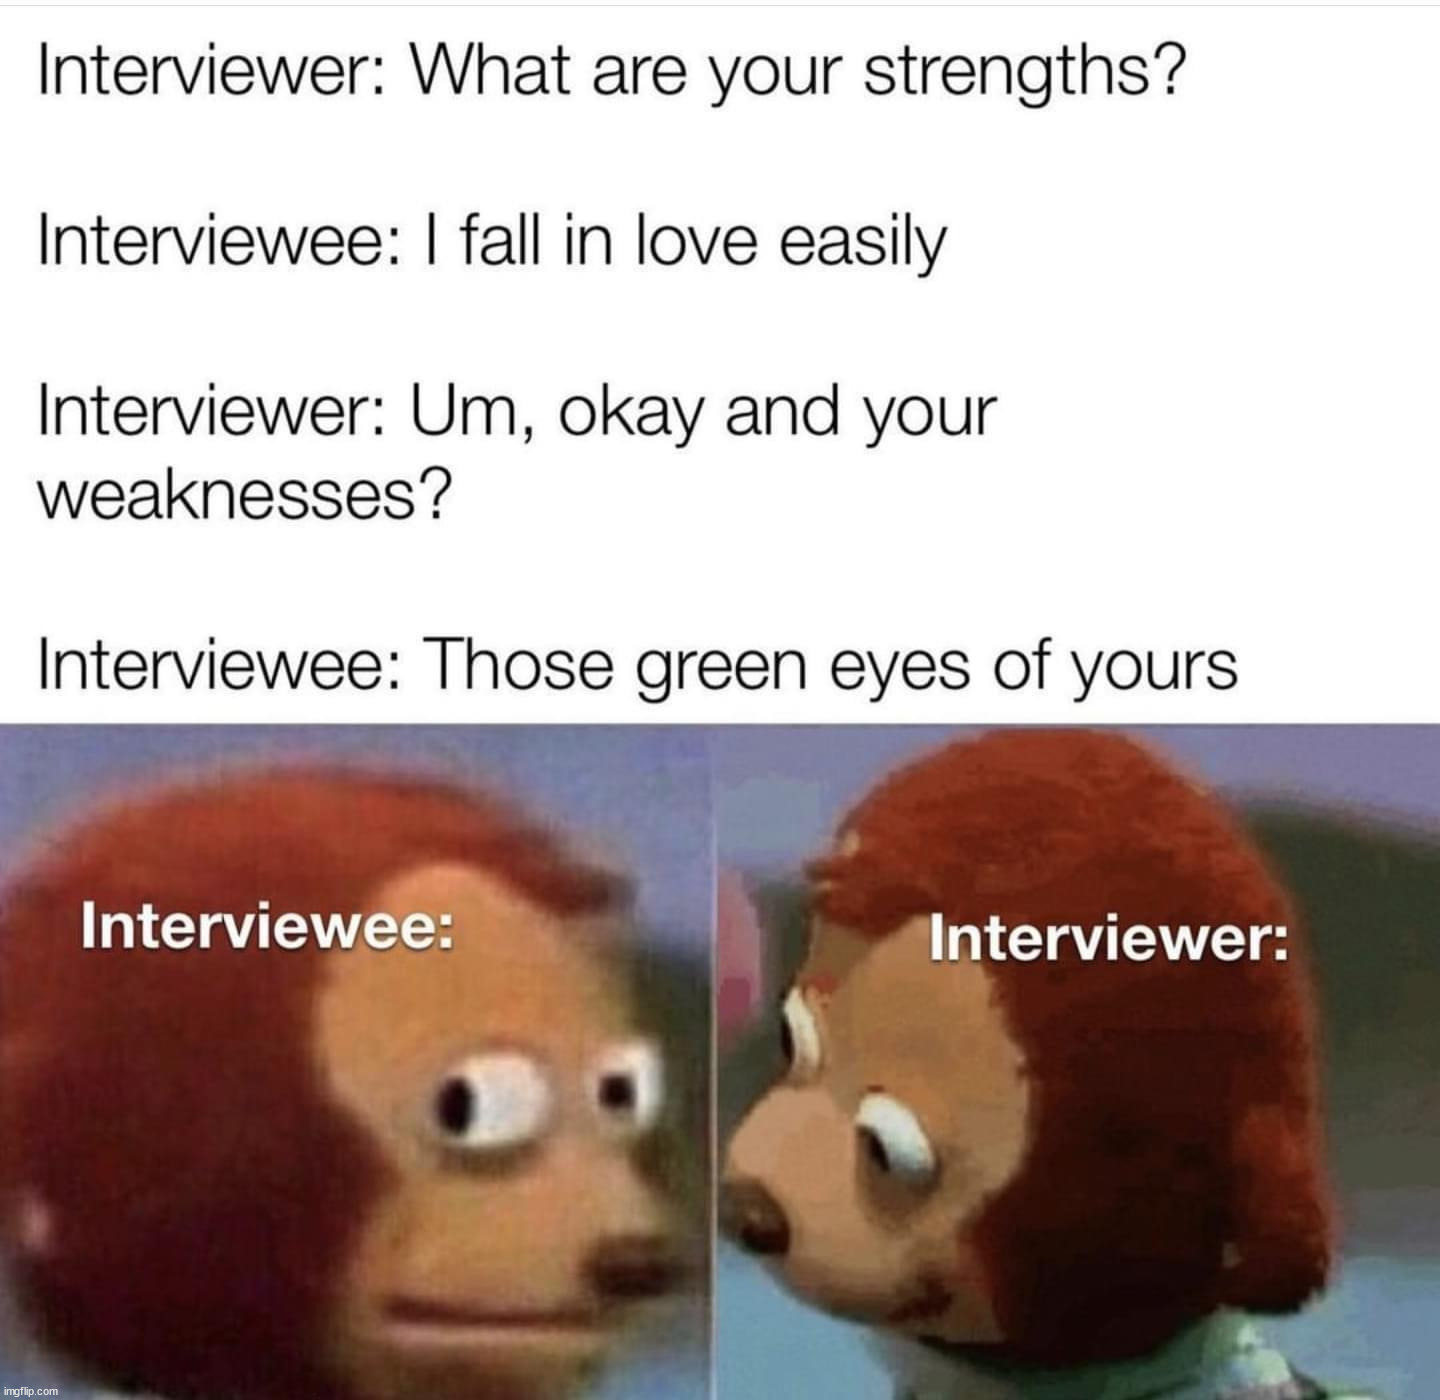 Making an interview fun. | image tagged in repost,job interview | made w/ Imgflip meme maker